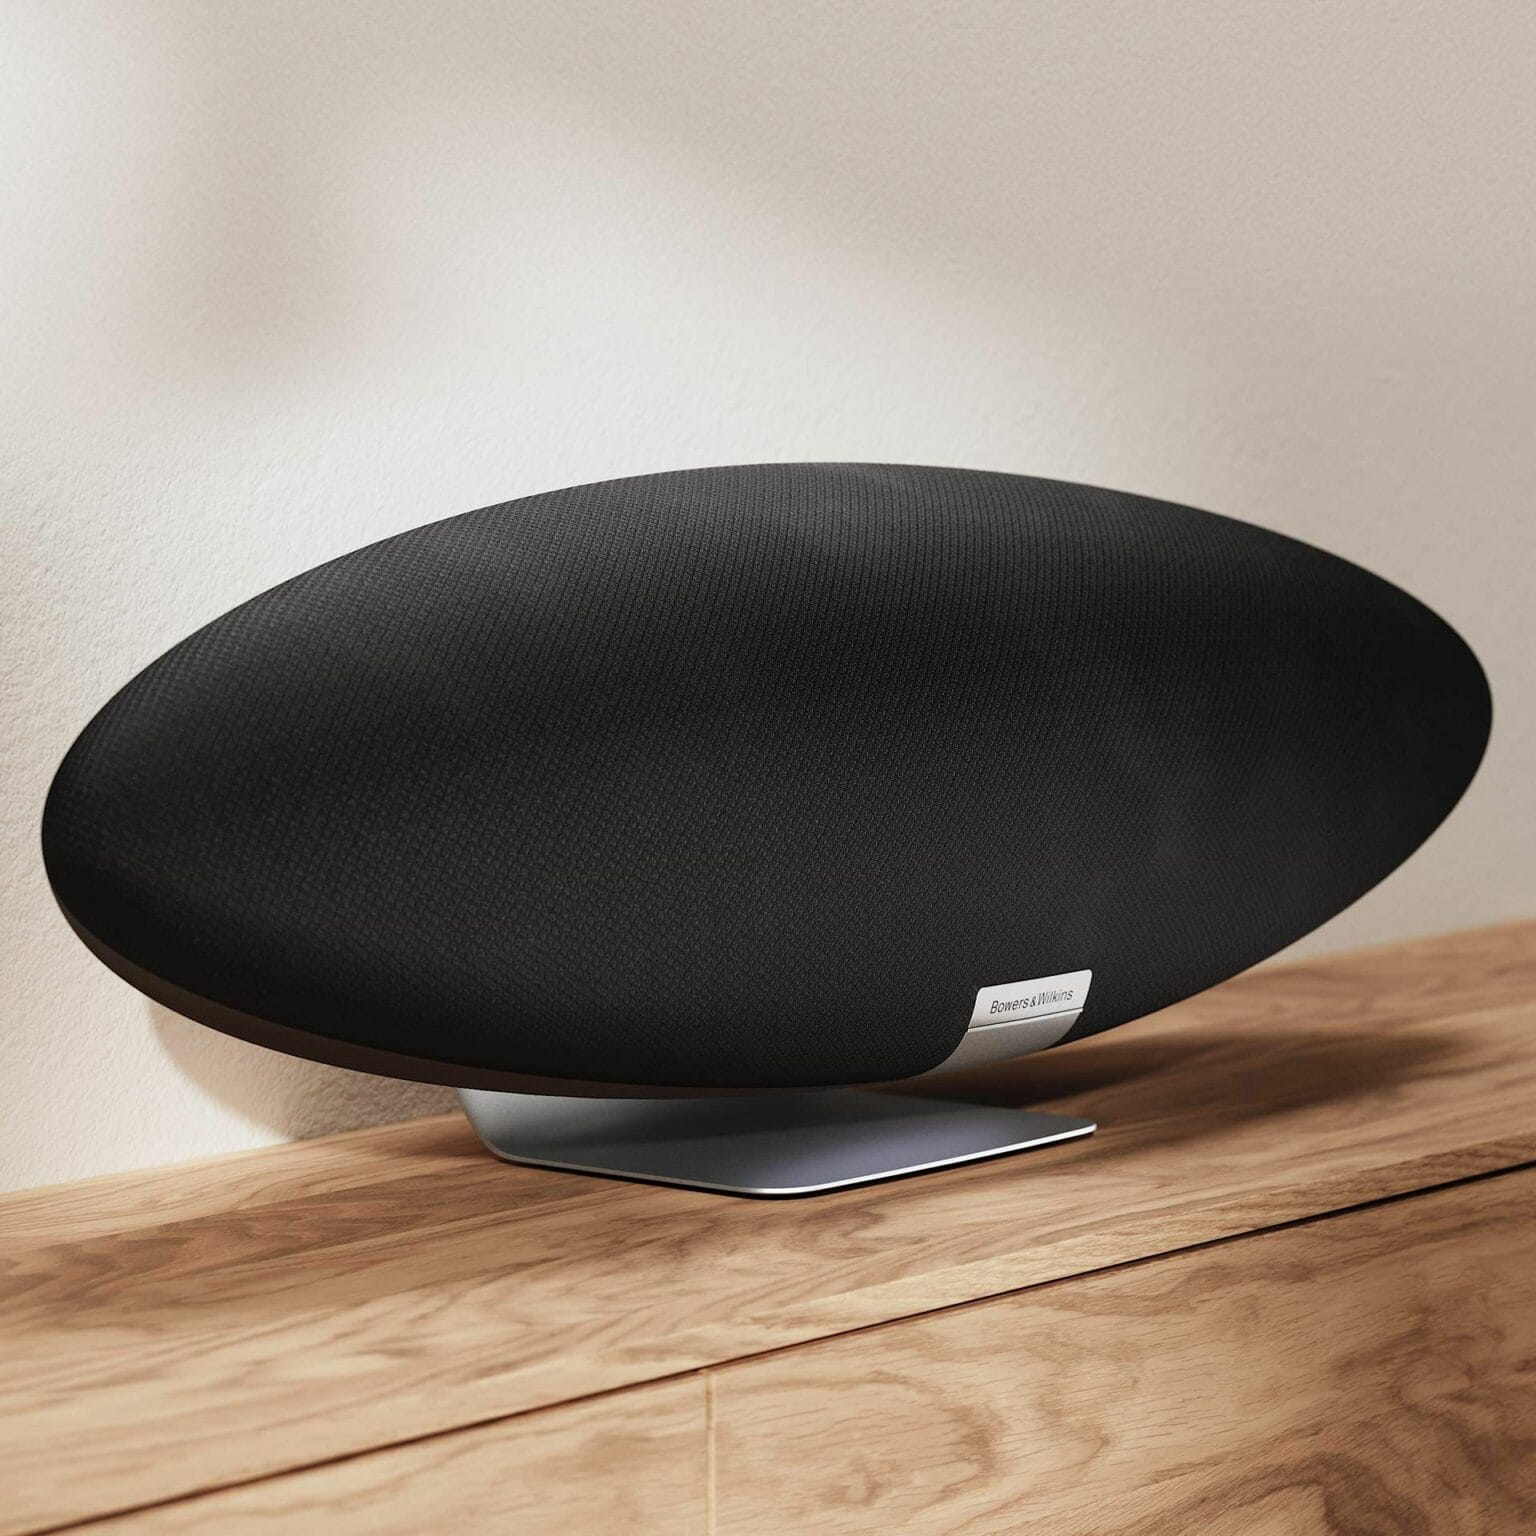 Bower & Wilkins revamped its powerful Zeppelin wireless speakers for today's streamers.